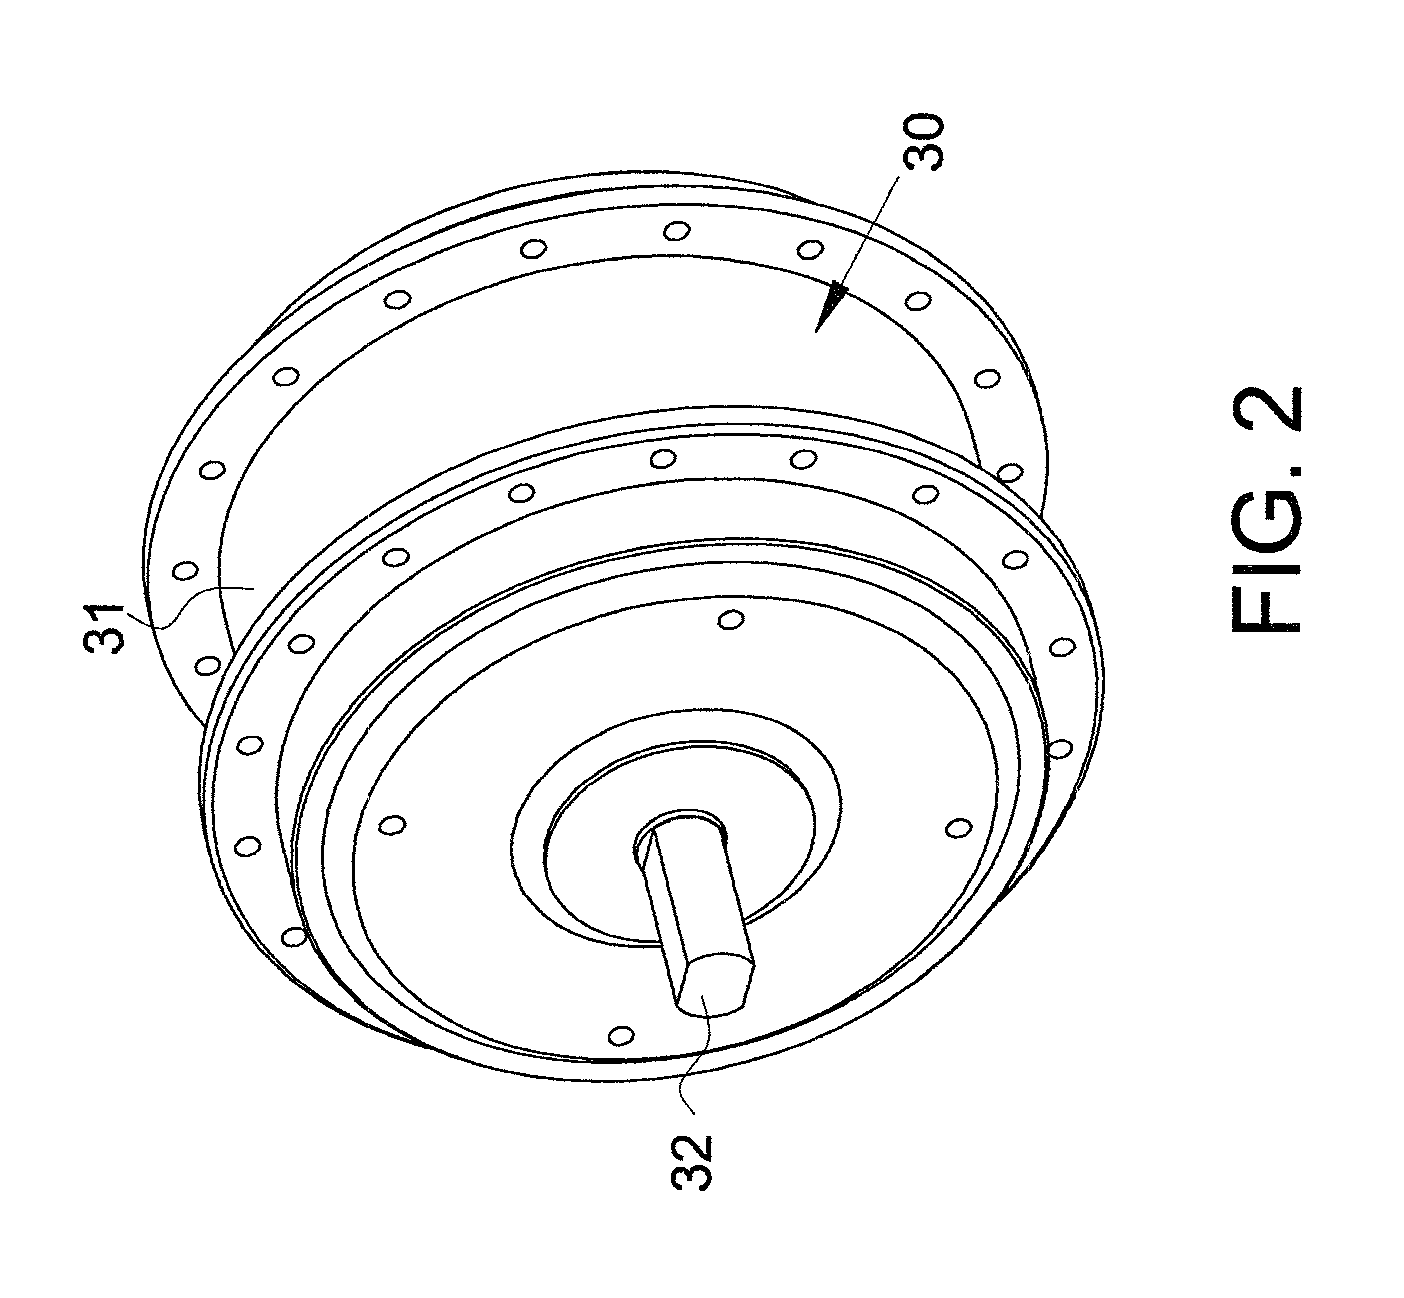 Hub motor for electric vehicles